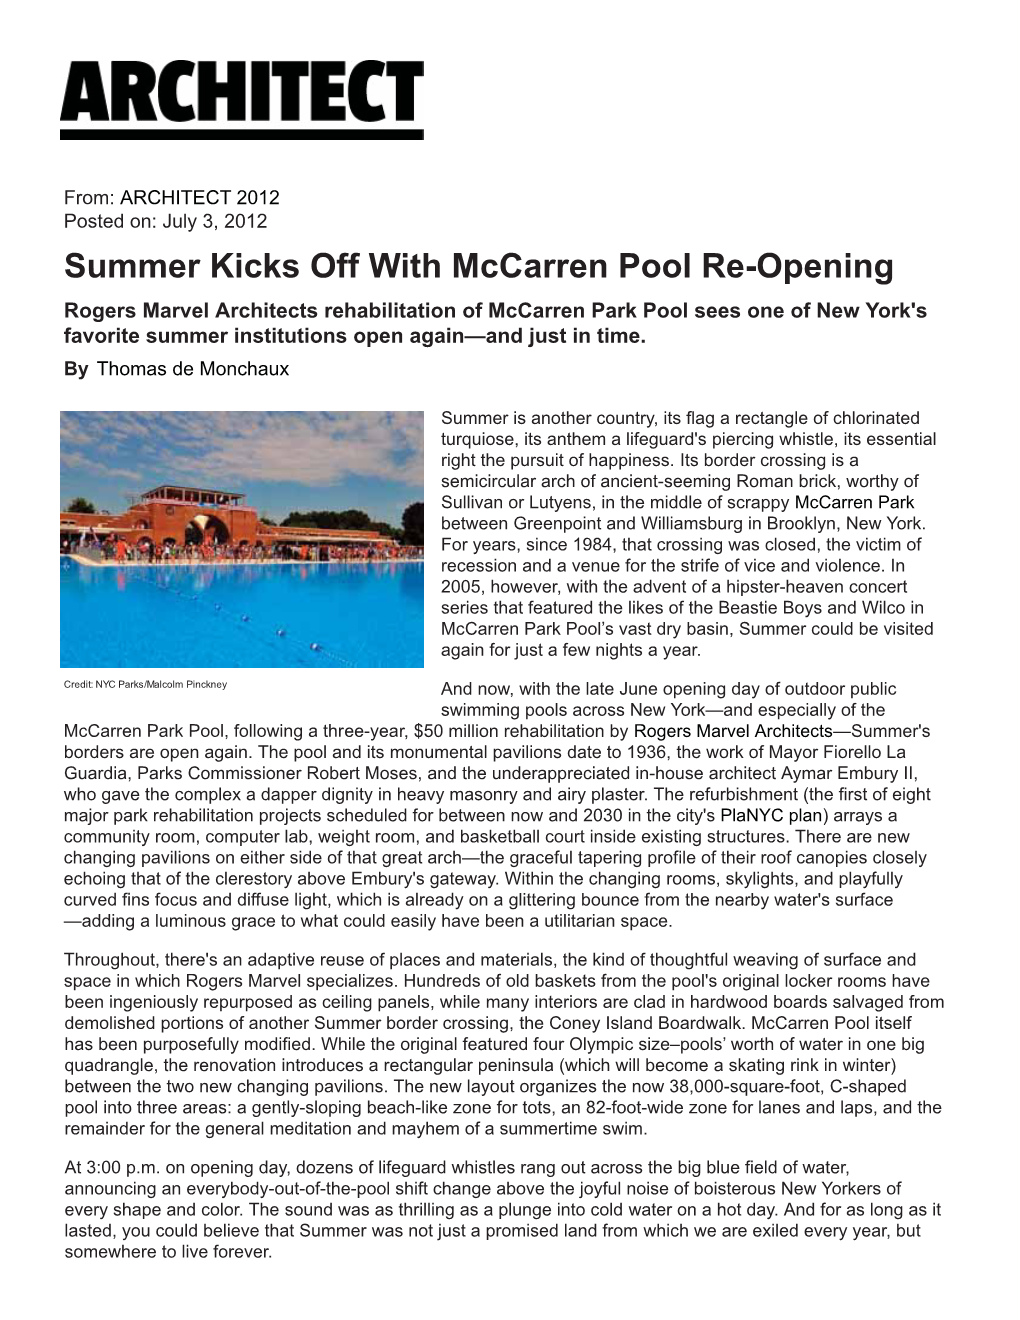 Rogers Marvel Architects Rehabilitation of Mccarren Park Pool Sees One of New York's Favorite Summer Institutions Open Again—And Just in Time